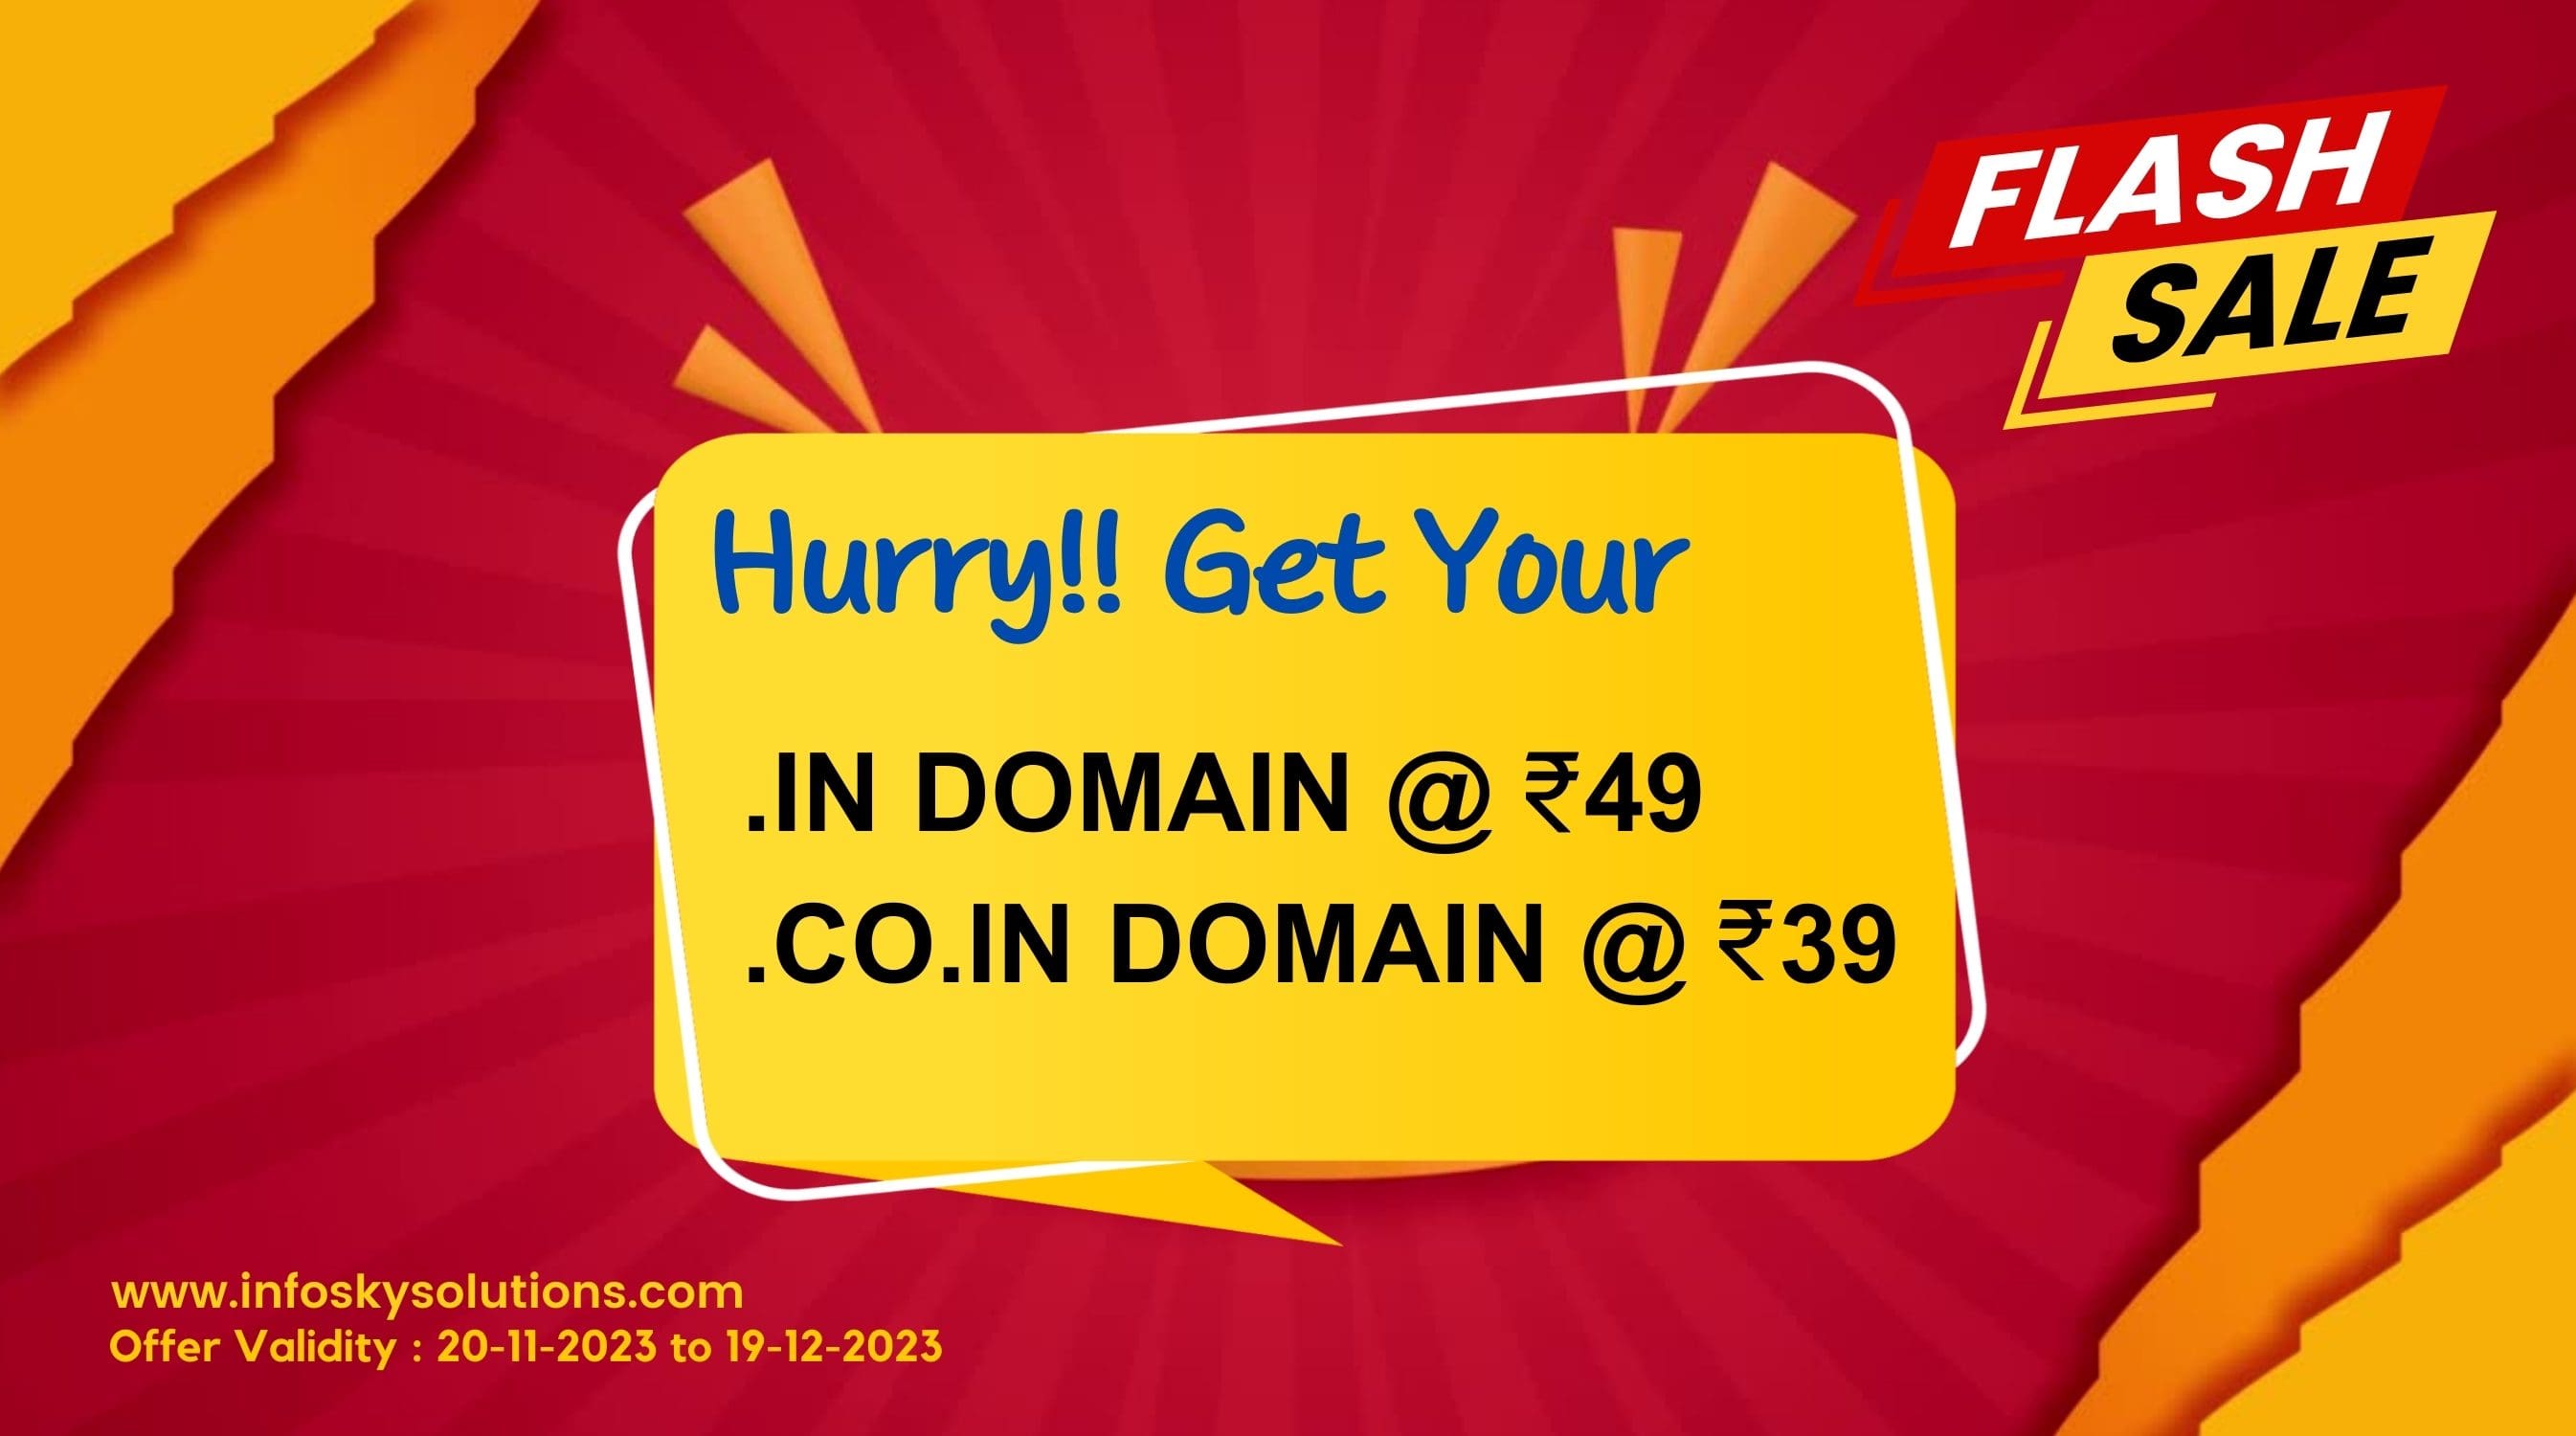 Domain Flash Sale .in domain just rupees 49 only from www.infoskysolutions.com